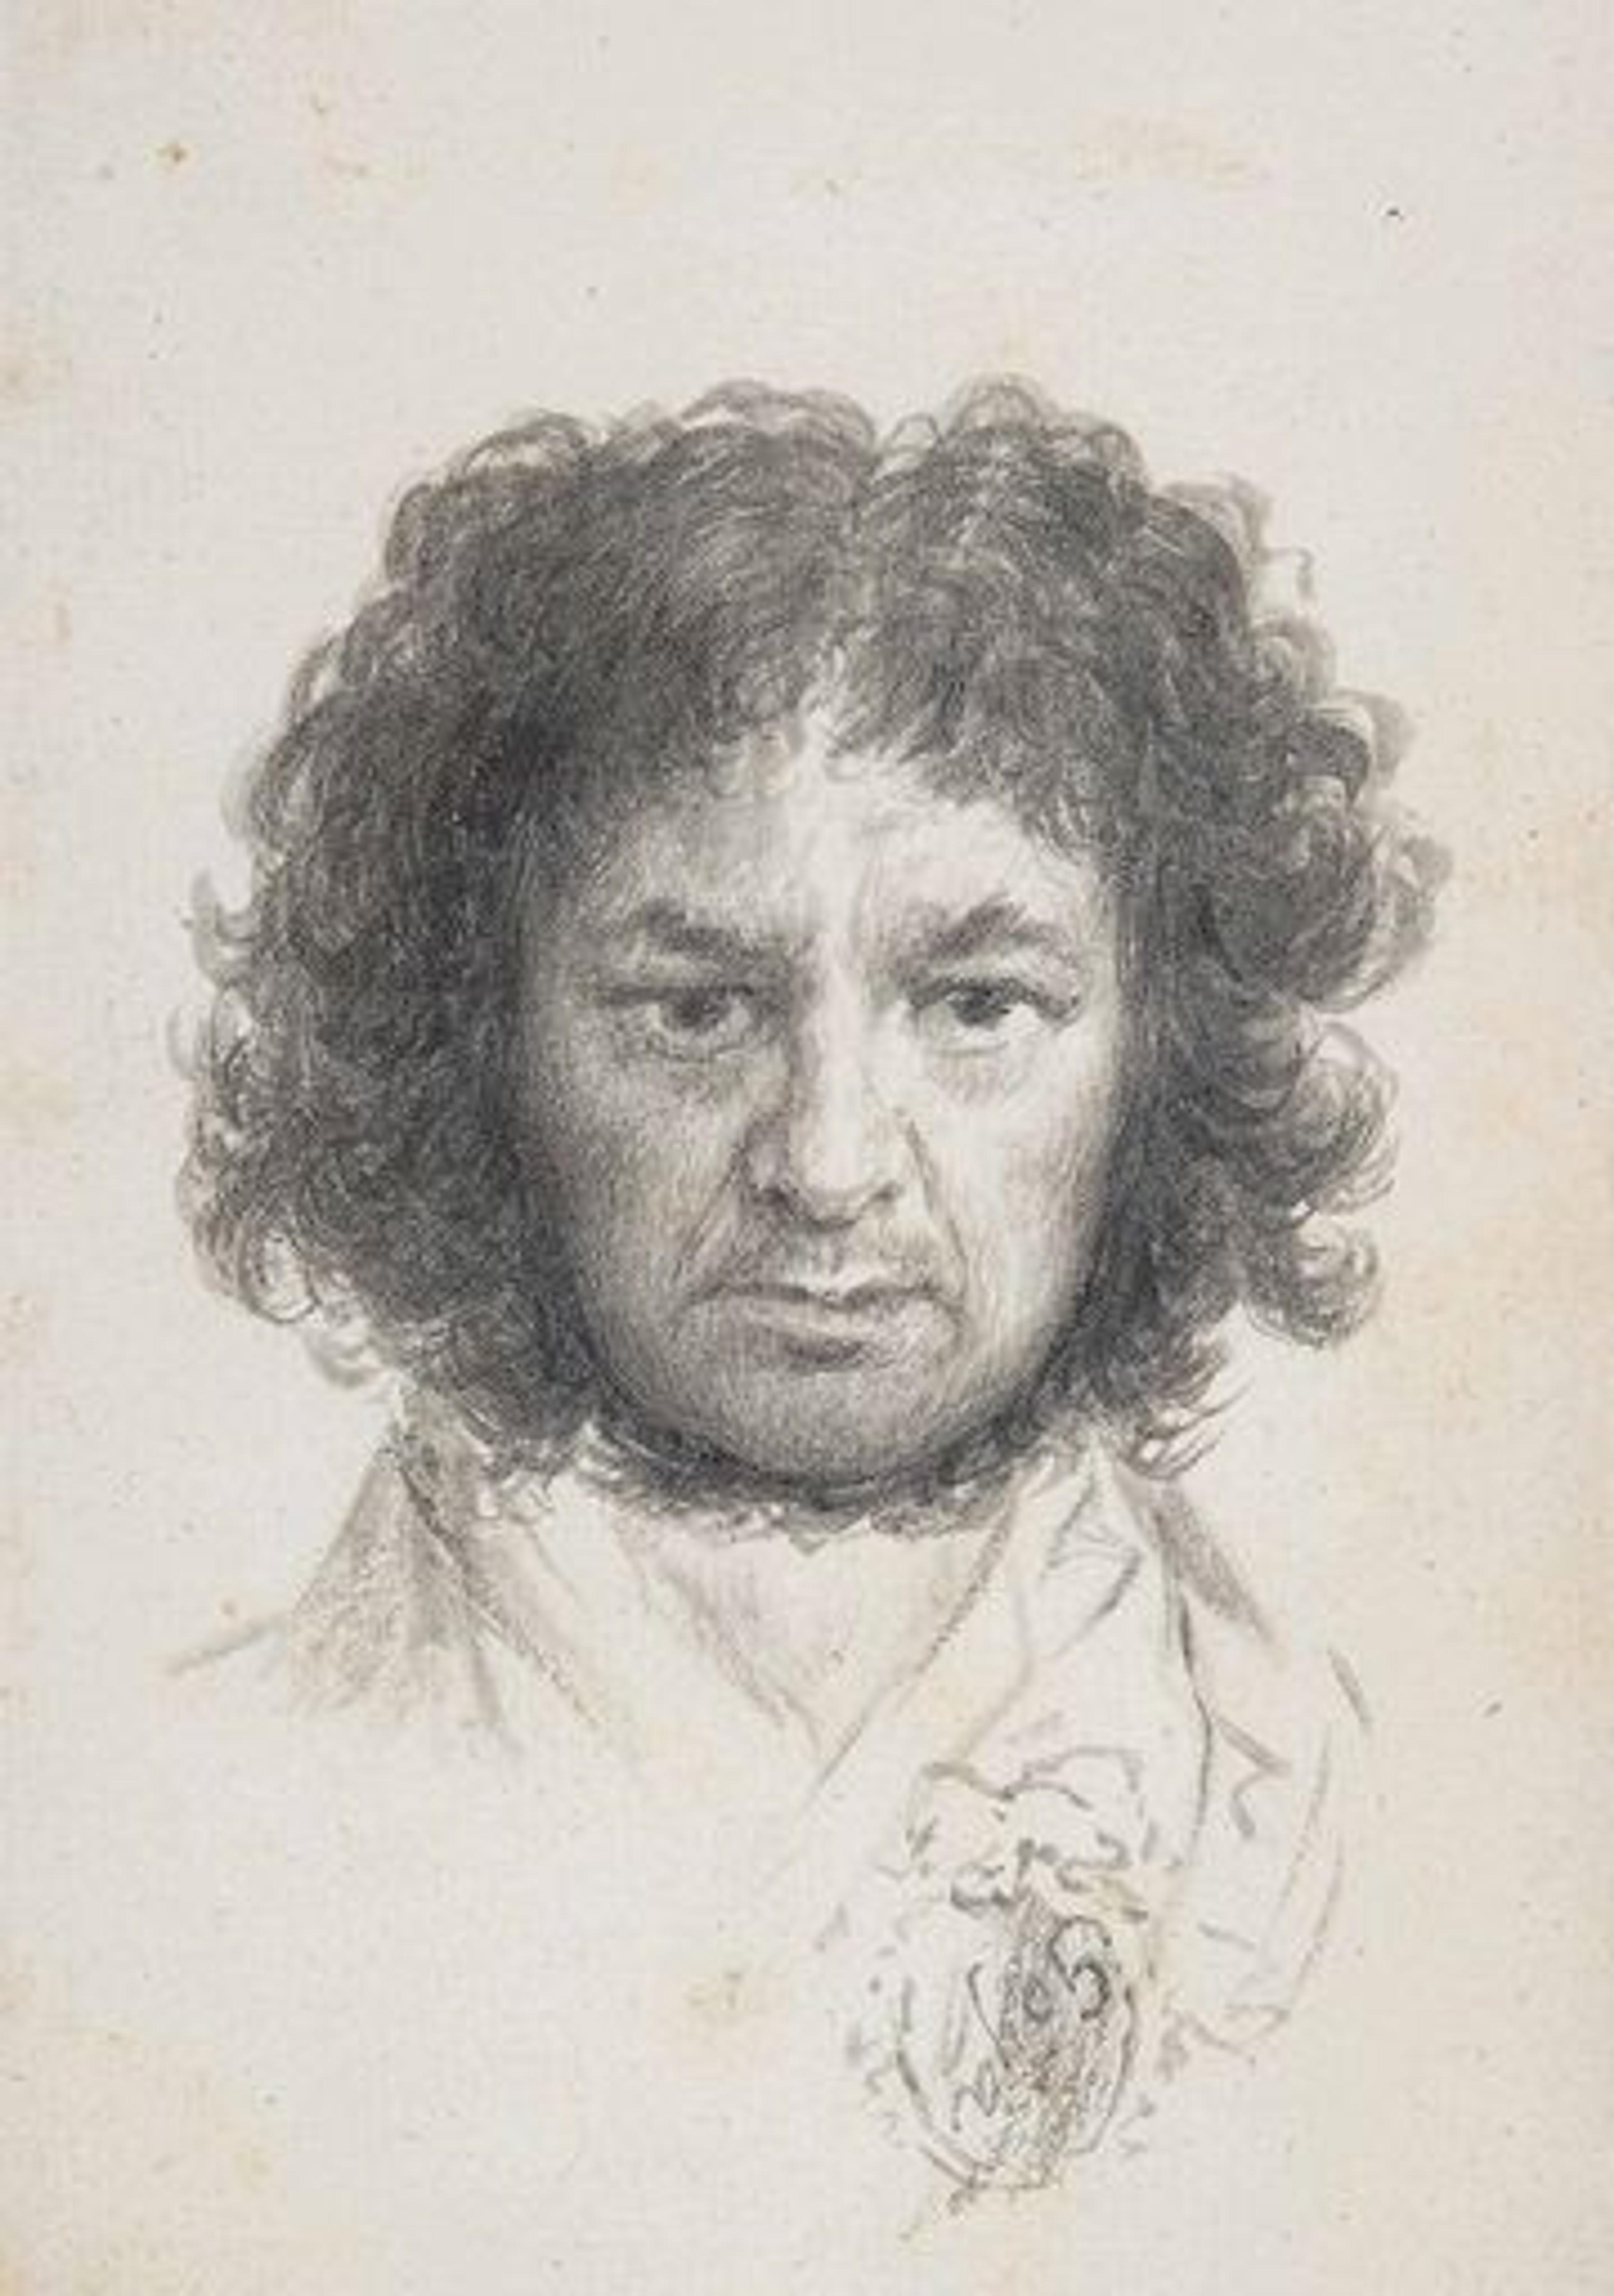 Portrait drawing of the painter Goya